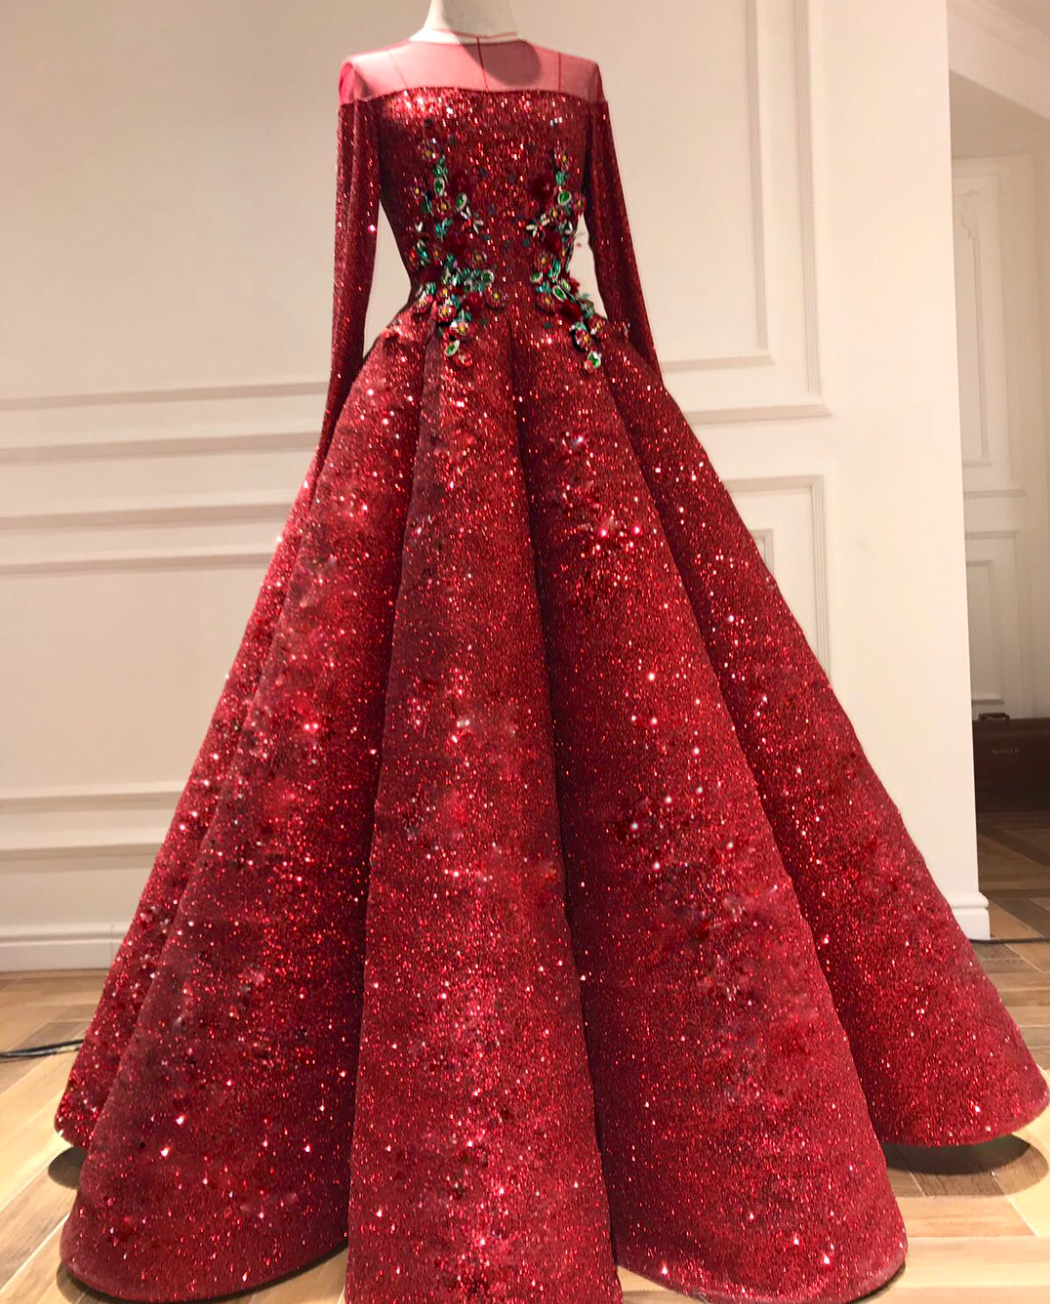 Red A-Line dress with sequins, long sleeves and embroidery